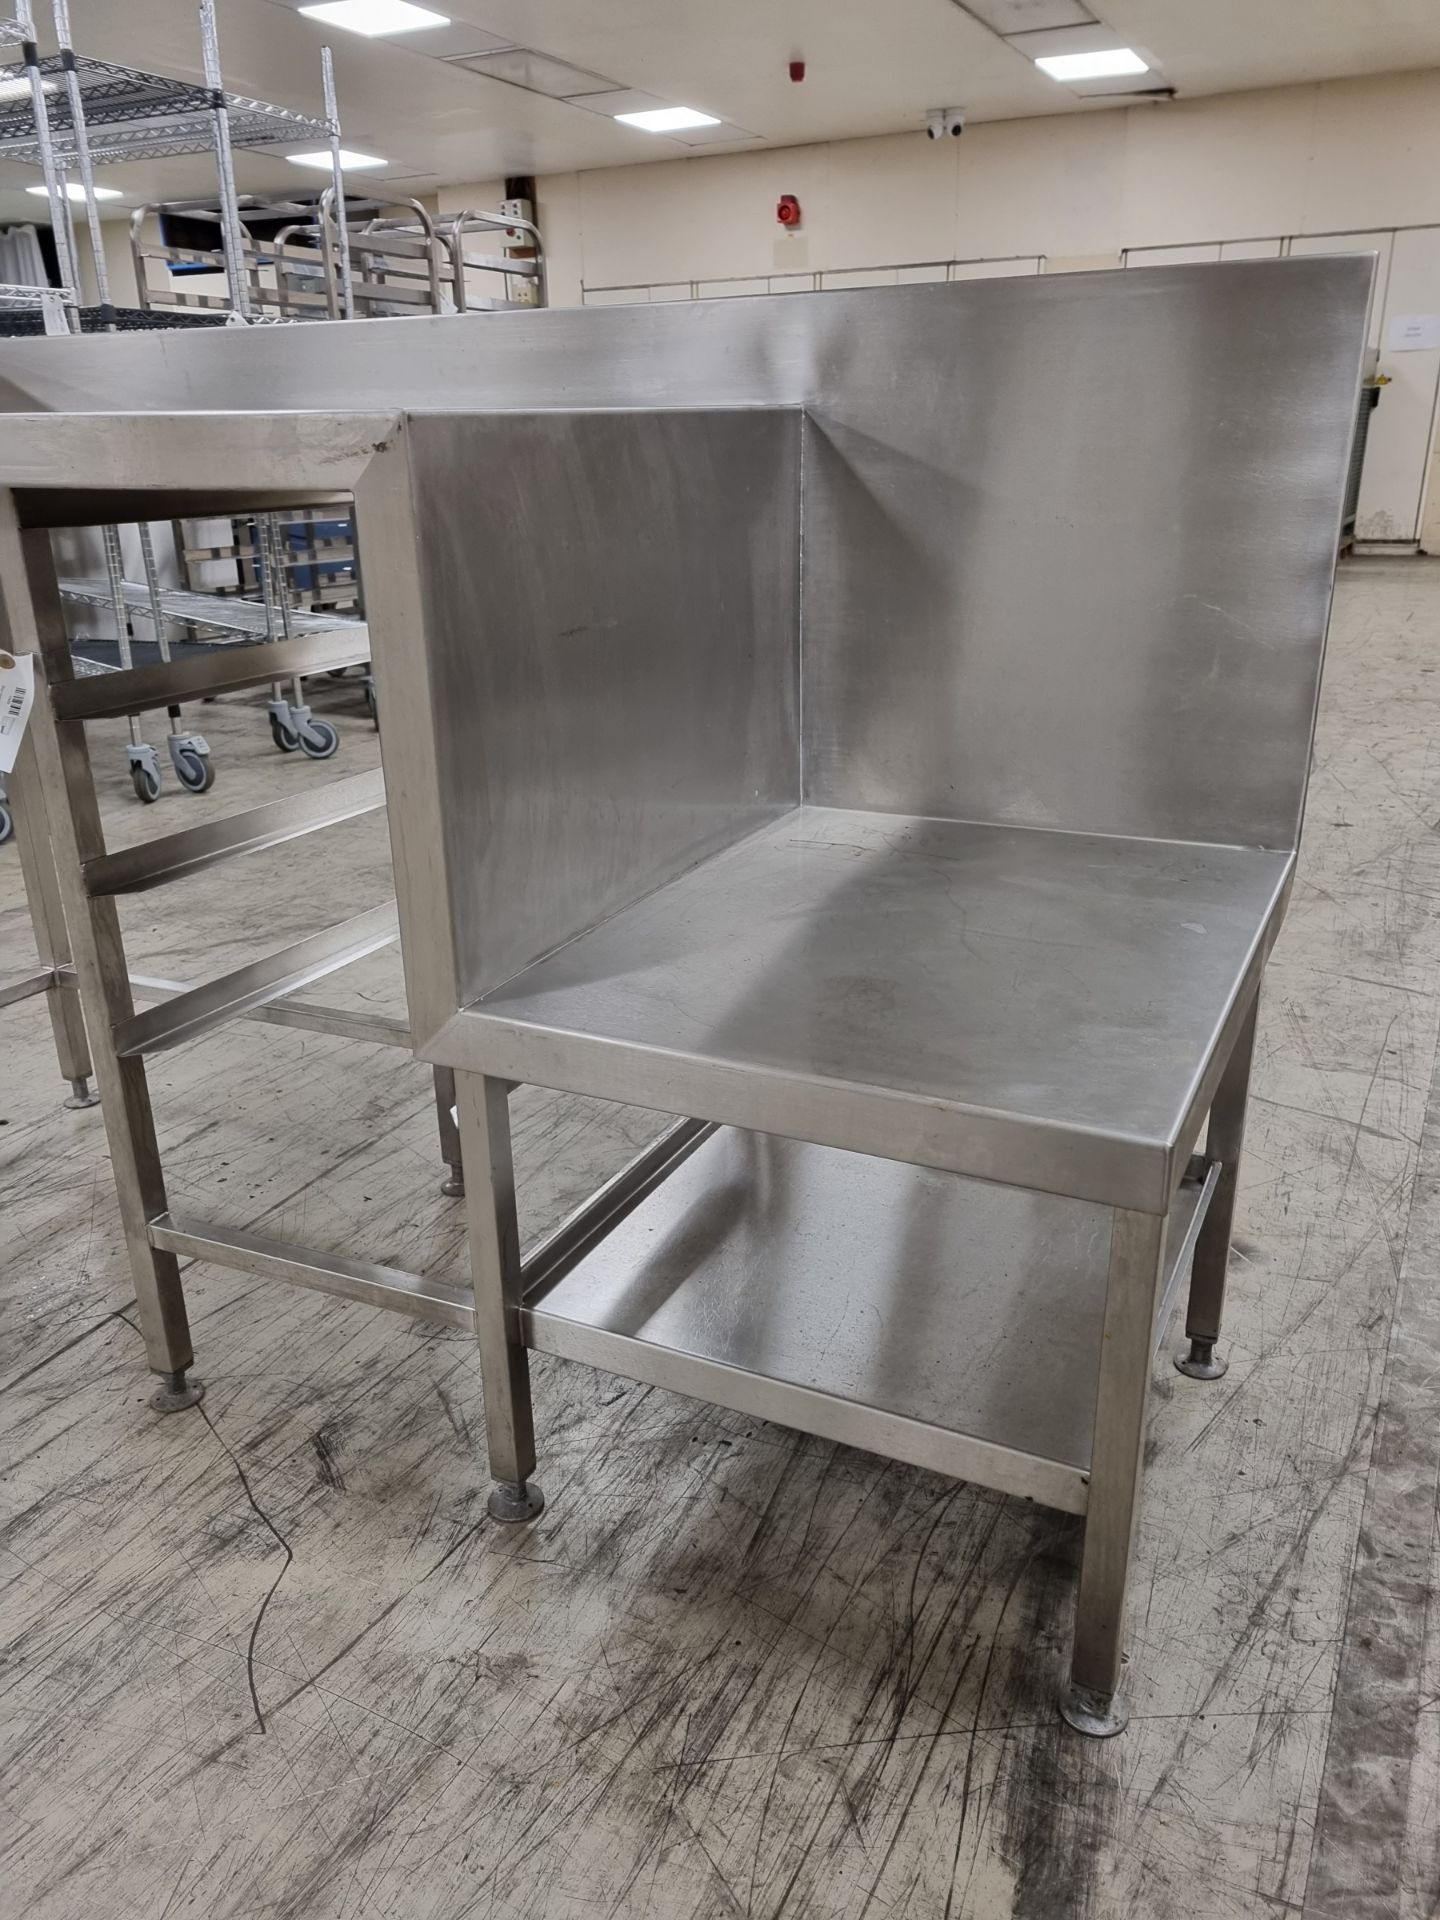 Stainless steel table with two side shelfs built in plus tray rack - Image 6 of 6